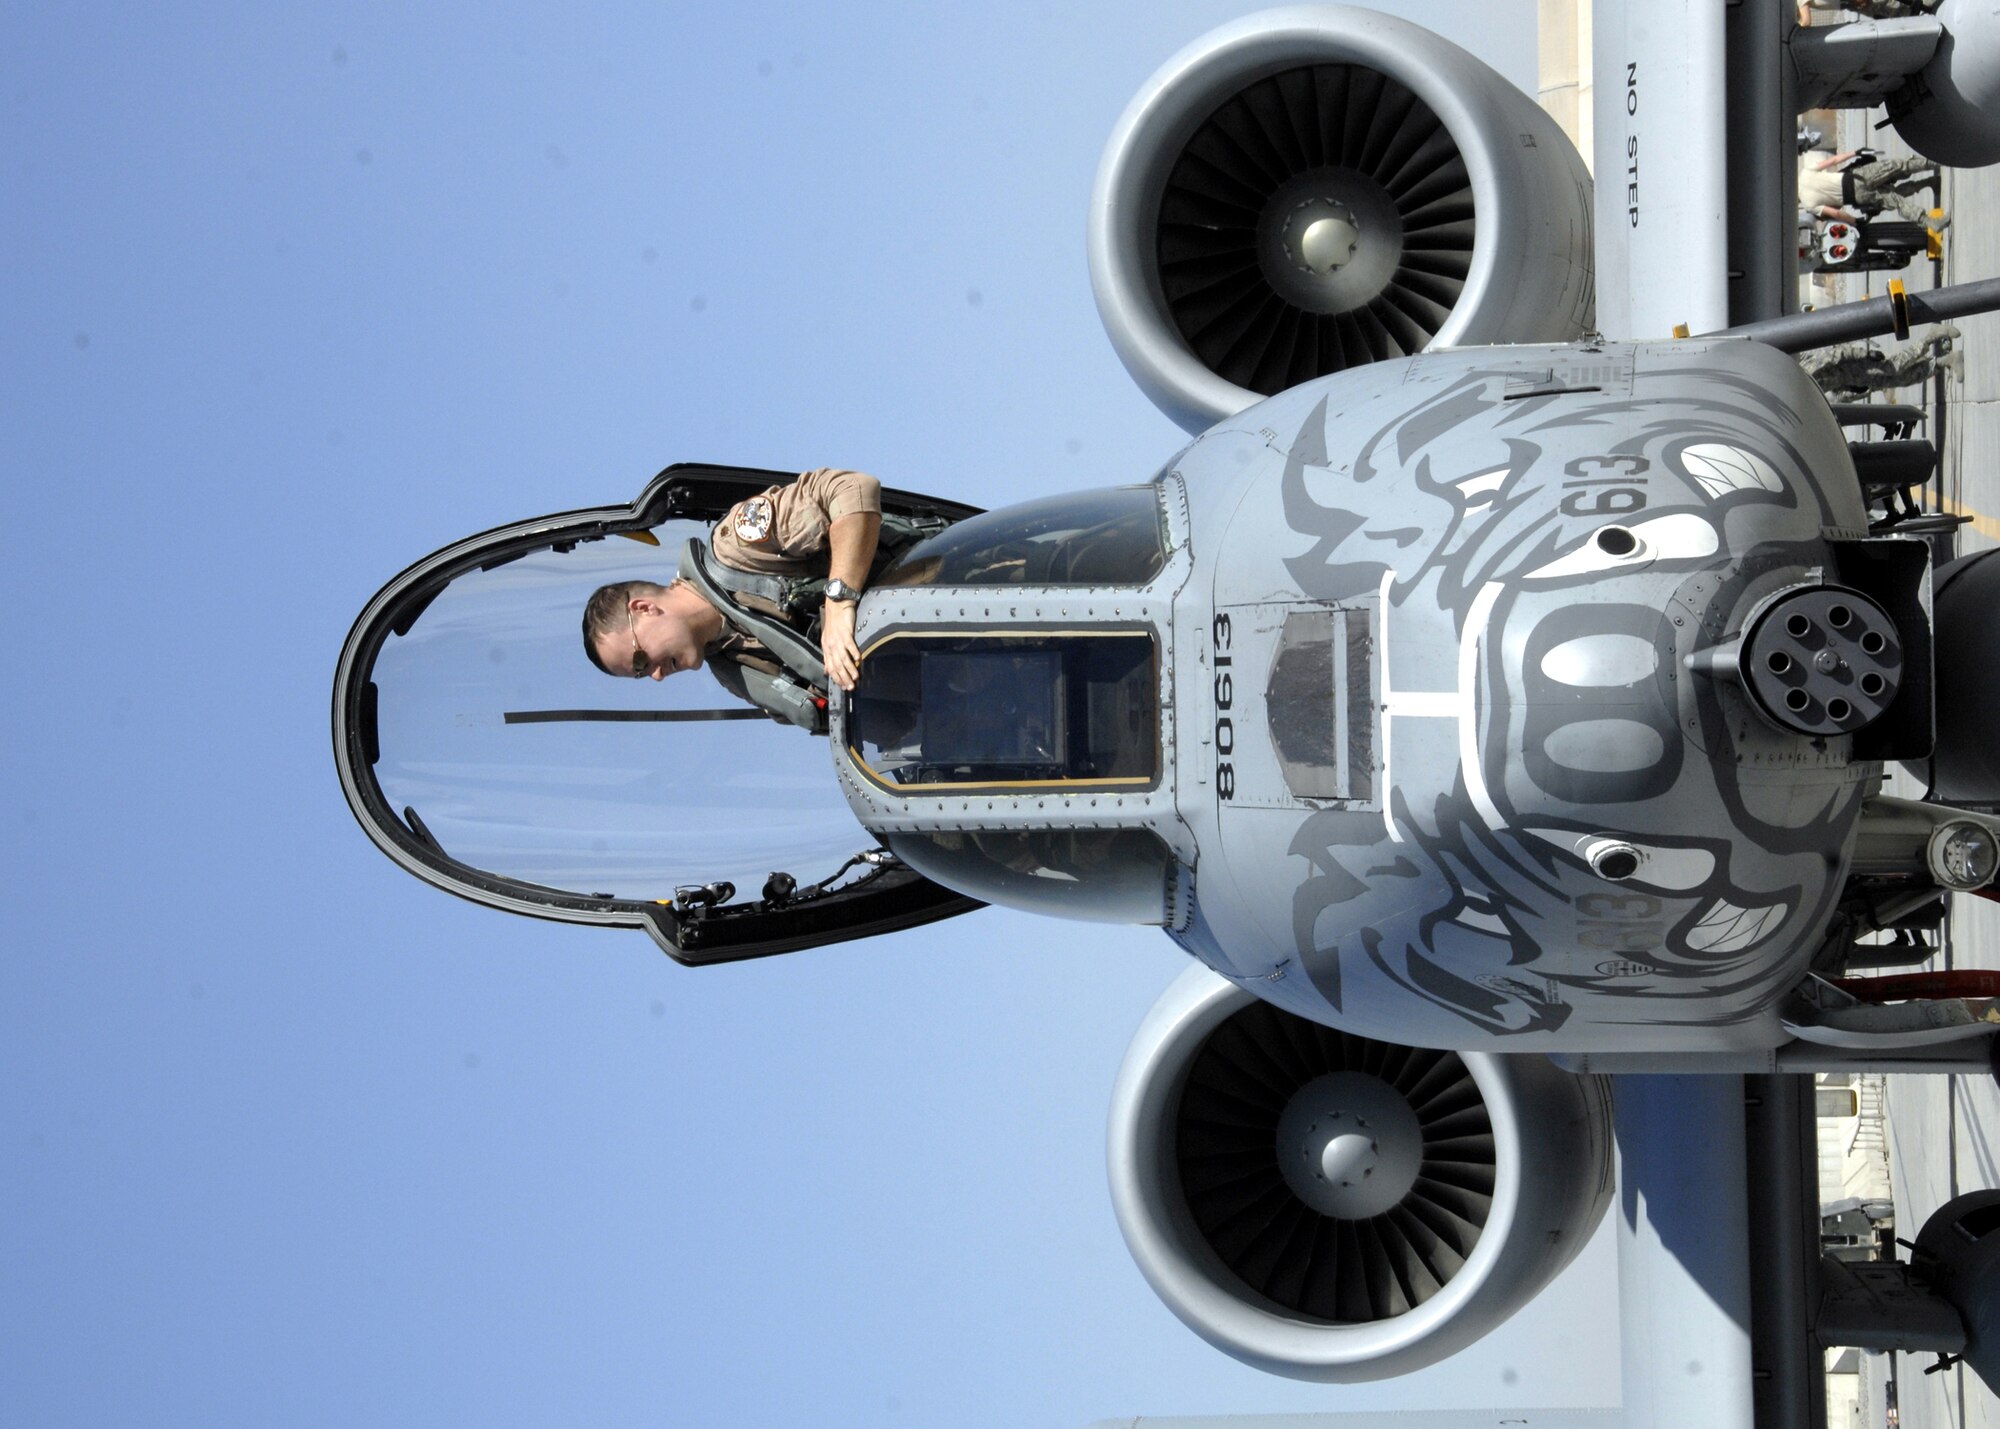 A pilot from the 175th Fighter Wing of the Maryland Air National Guard exits the cockpit of an A-10 Thunderbolt II "Warthog" with the 188th Fighter Wing of the Arkansas Air National Guard after piloting the aircraft from his home station in Baltimore, Md., Jan. 13, 2010. The transition from 354th Expeditionary Fighter Squadron to the 104th EFS is near completion after the final six A-10s taxied into their own revetments. (U.S. Air Force photo by Senior Airman Timothy Taylor)